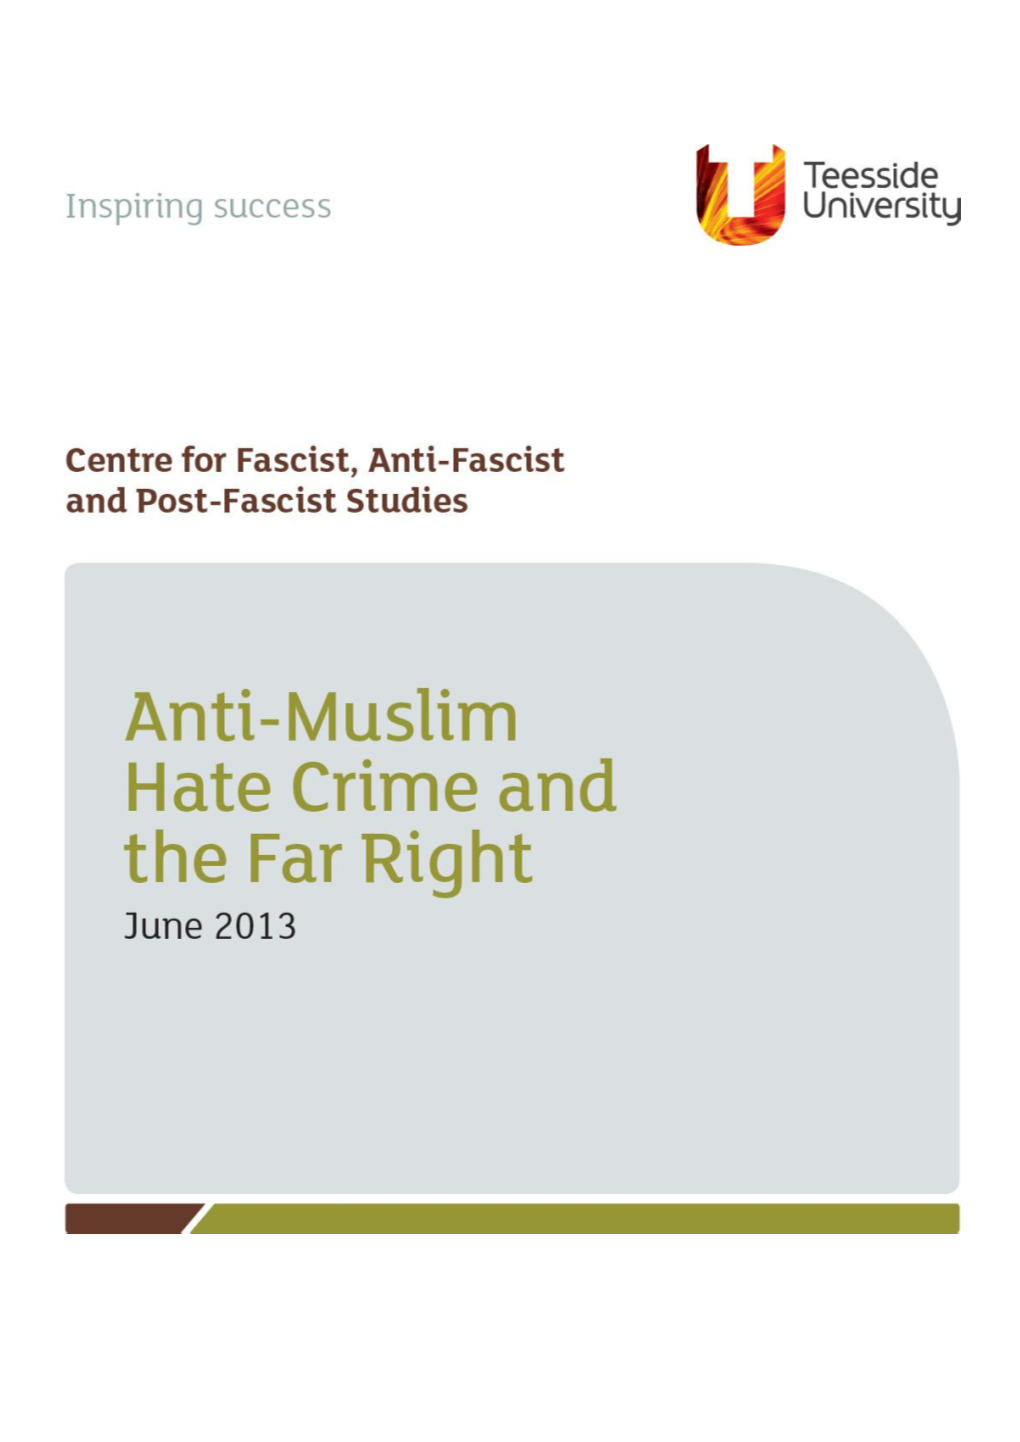 Anti-Muslim Hate Crime and the Far Right